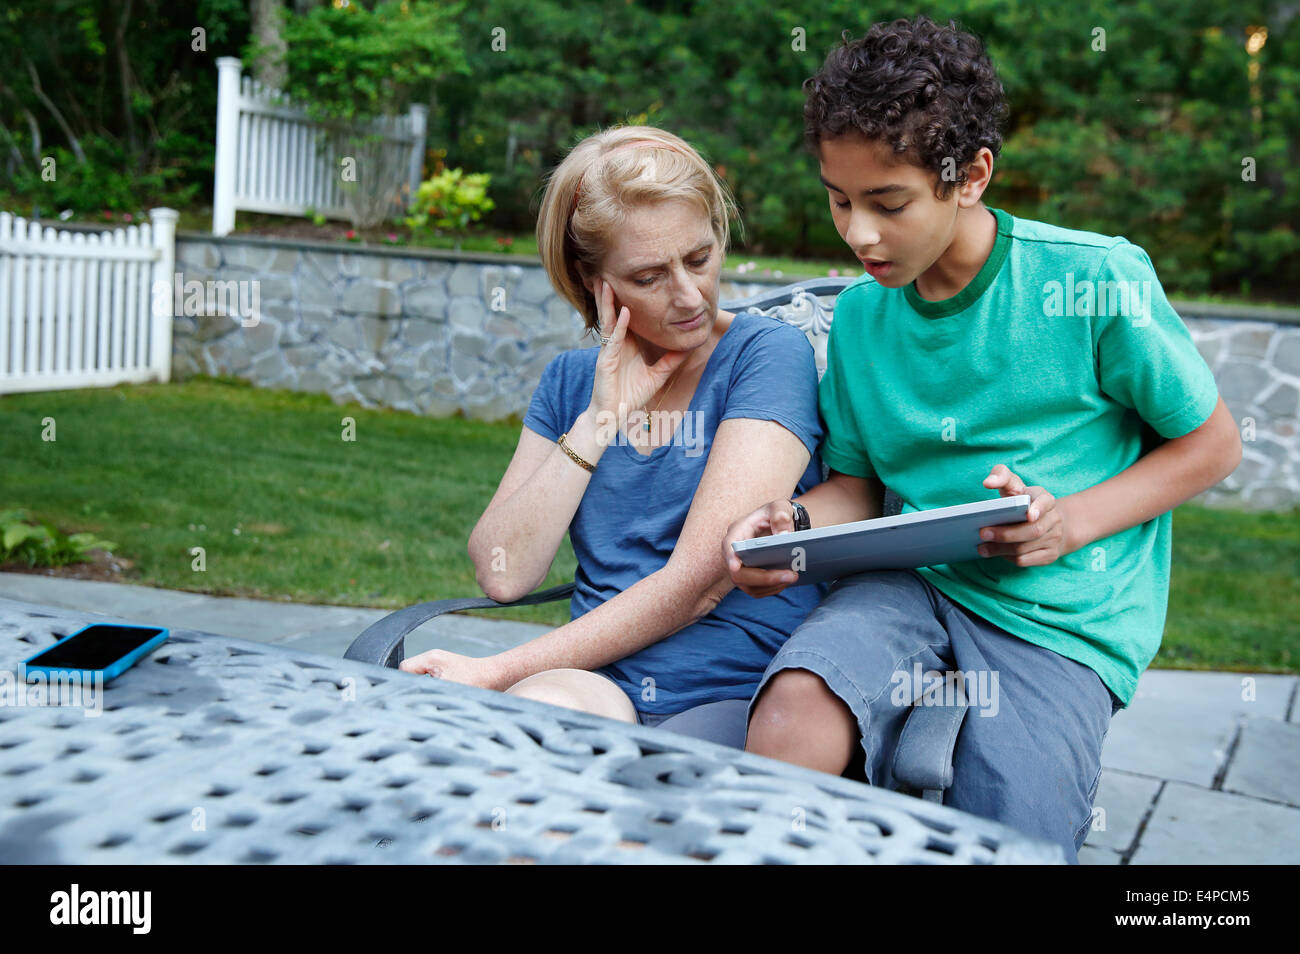 A boy shows his mother how to use a tablet computer Stock Photo